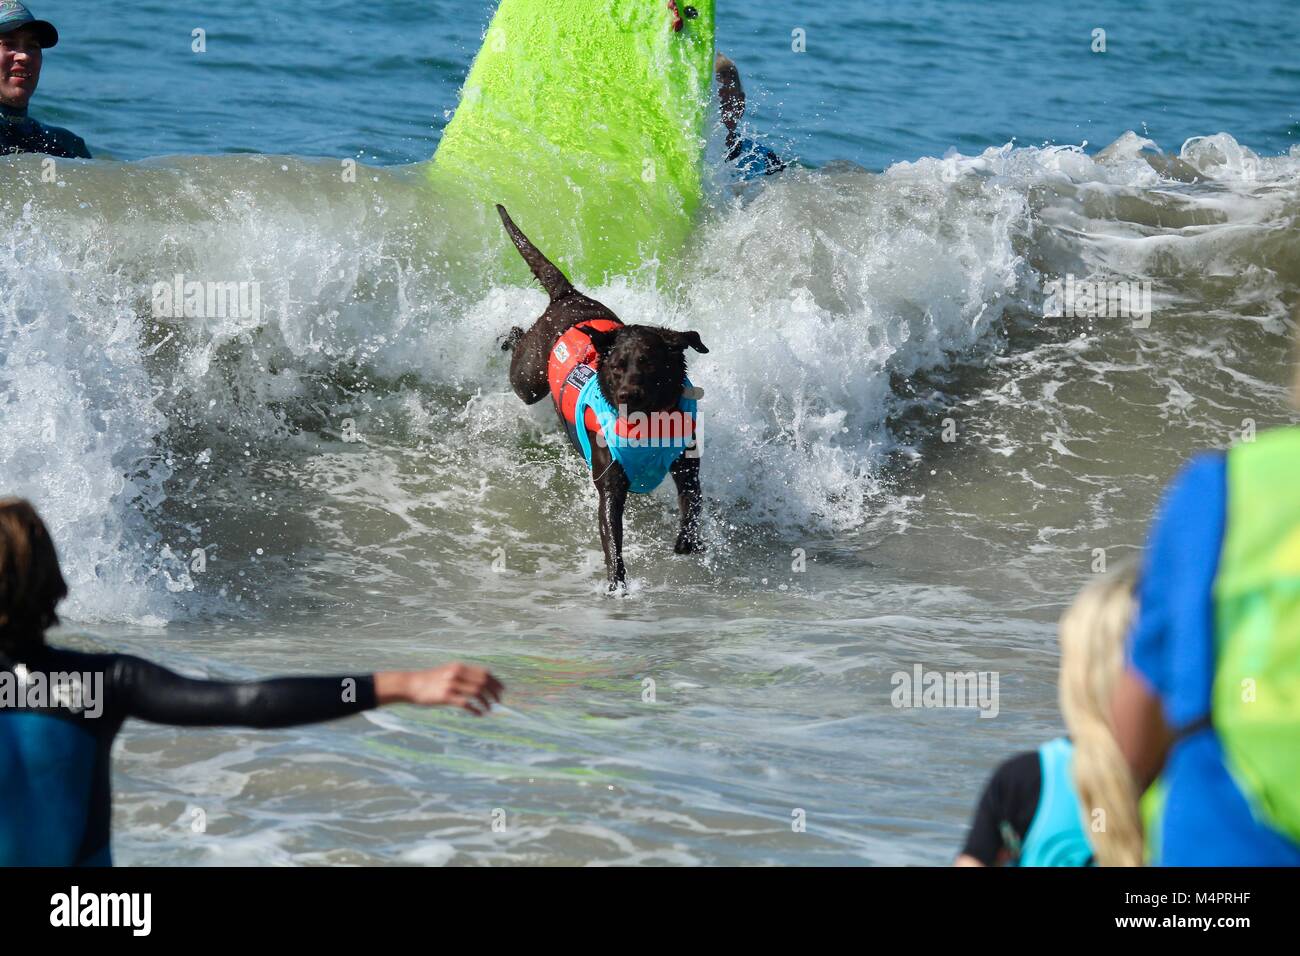 Surf City Surfing Dog Competition Stock Photo